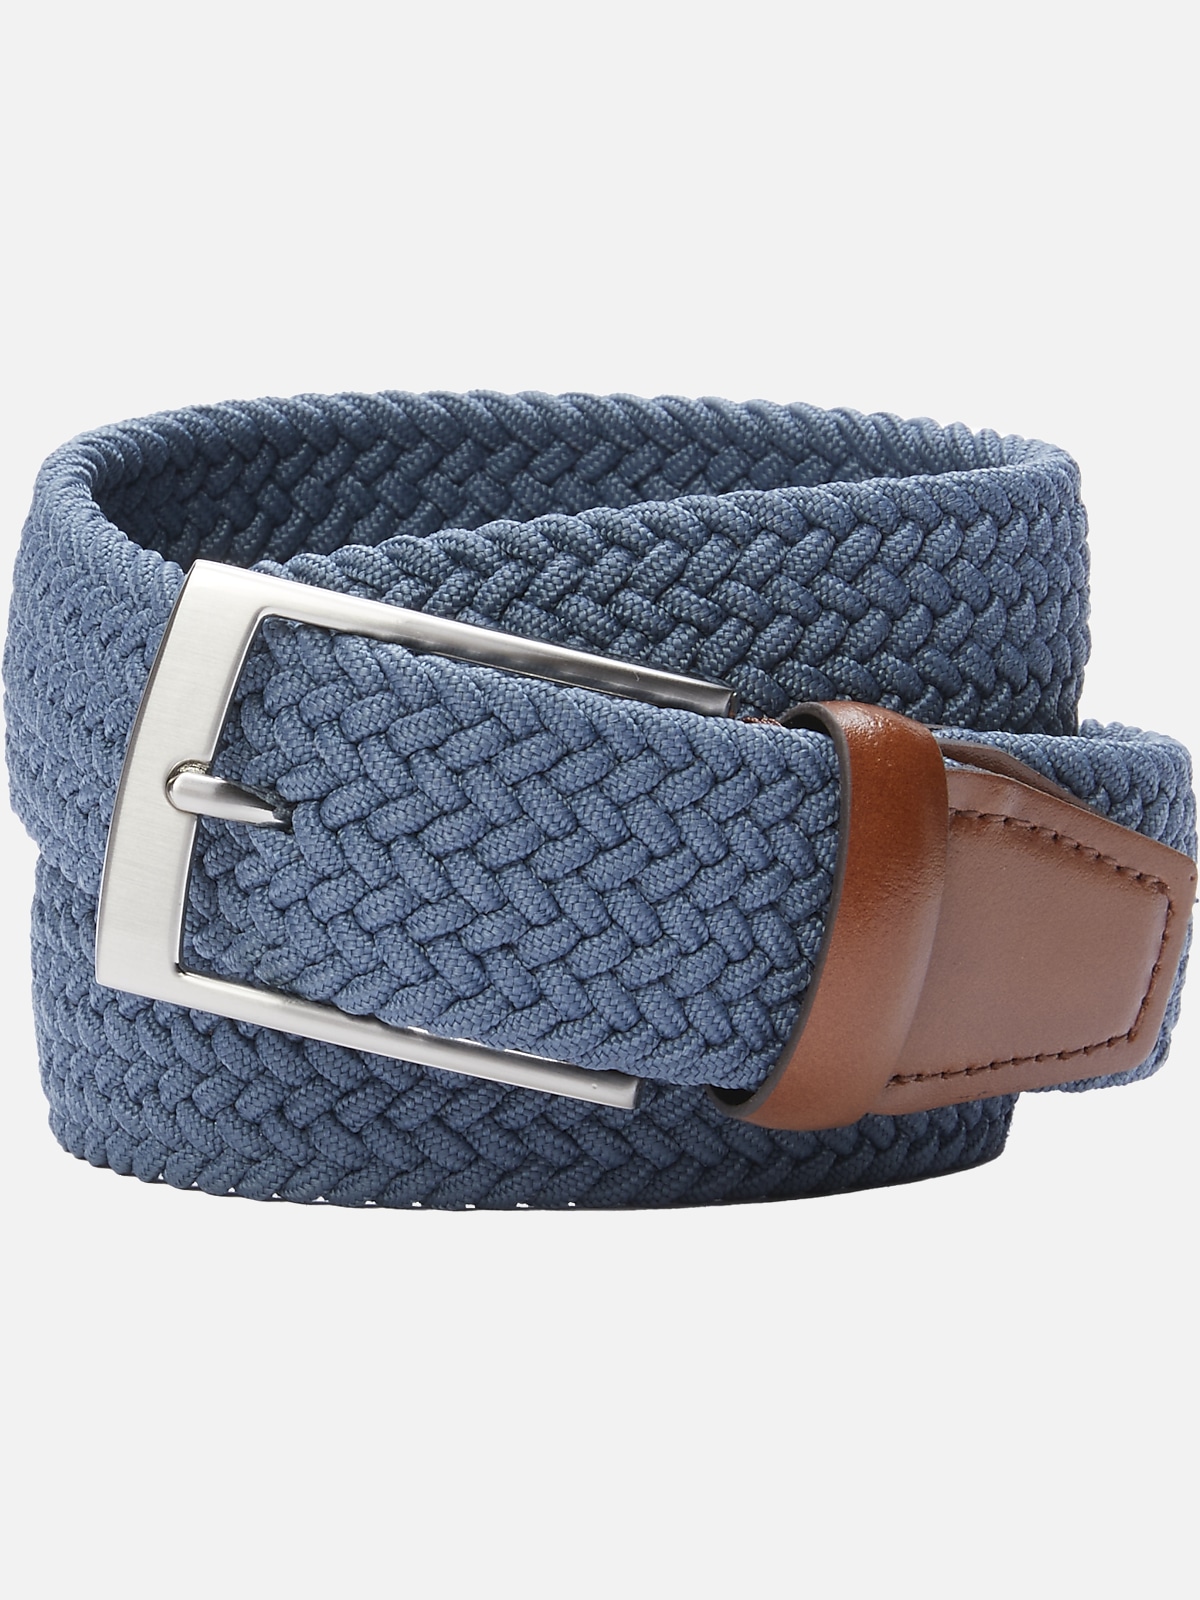 https://image.menswearhouse.com/is/image/TMW/TMW_88KE_08_JOSEPH_ABBOUD_BELTS_LIGHT_NAVY_MAIN?imPolicy=pdp-zoom-mob